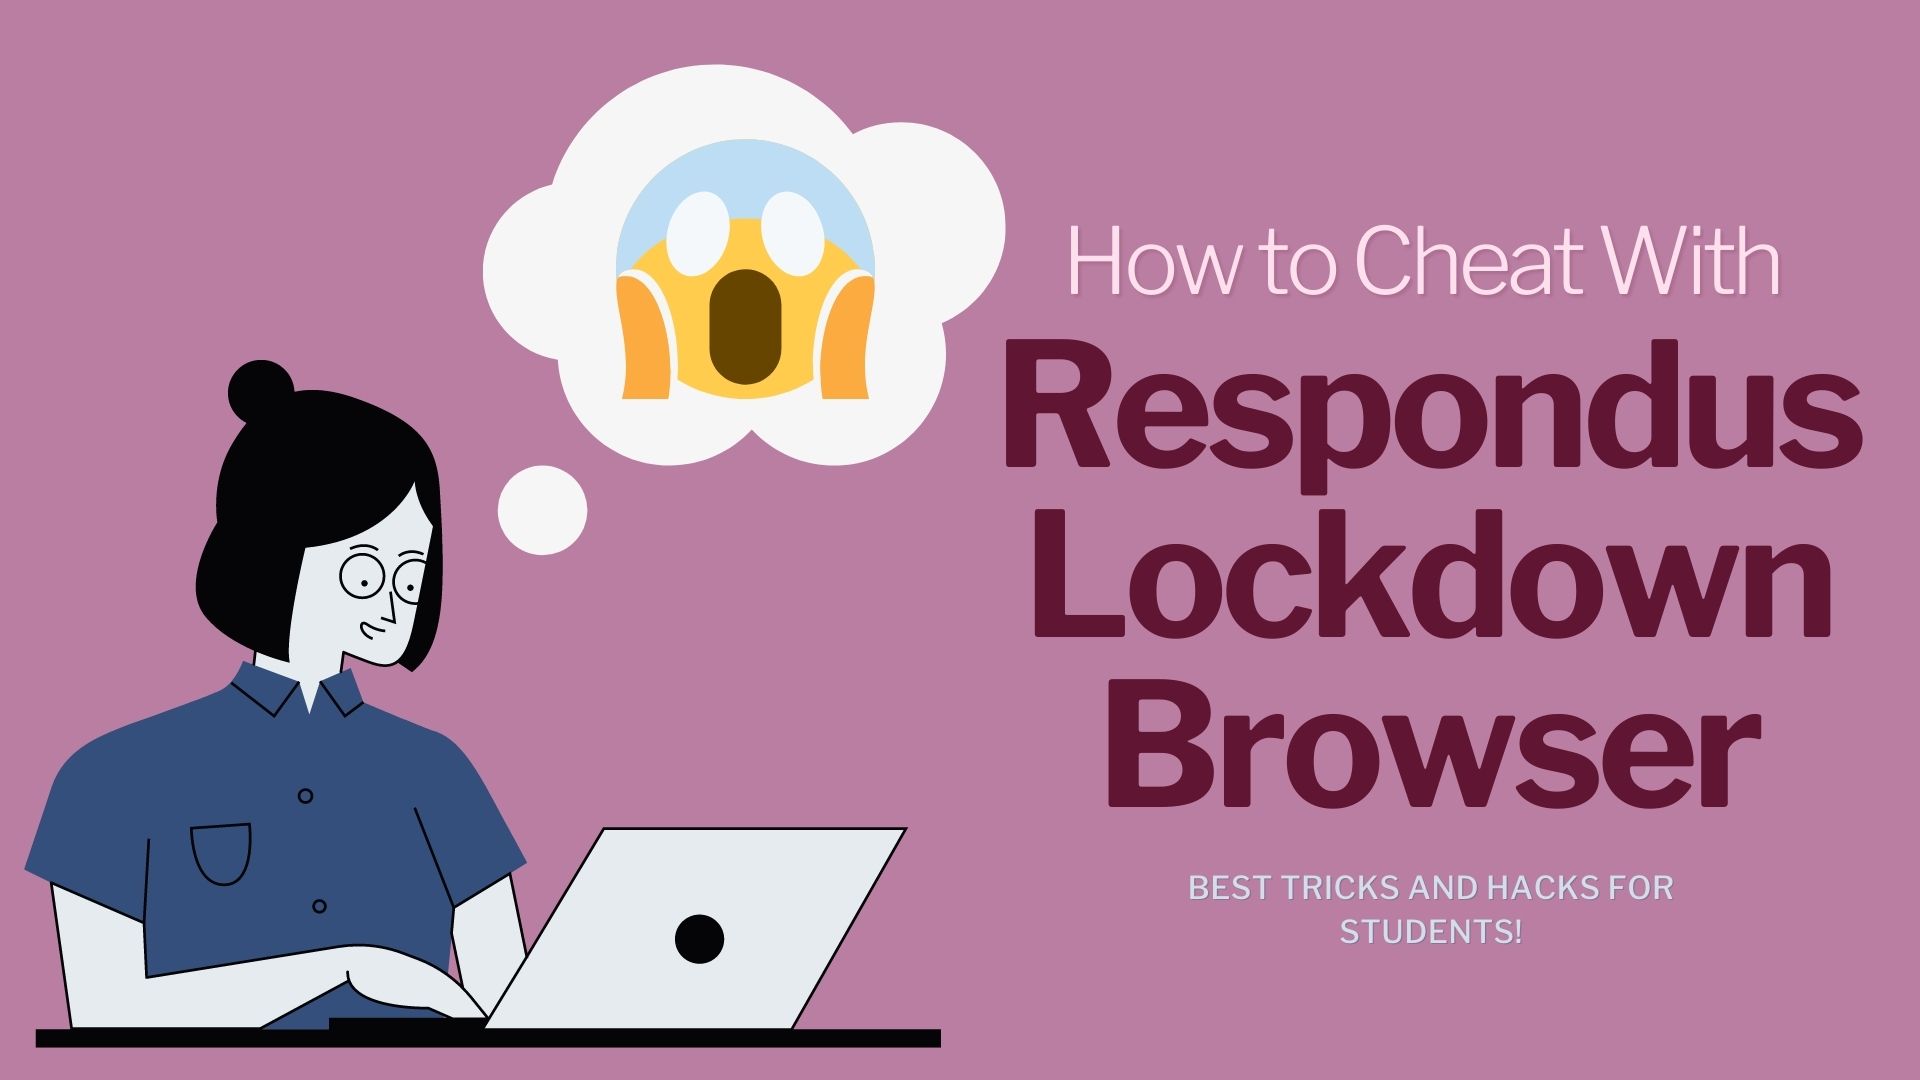 How to Cheat With Respondus Lockdown Browser: Top Tricks and Hacks